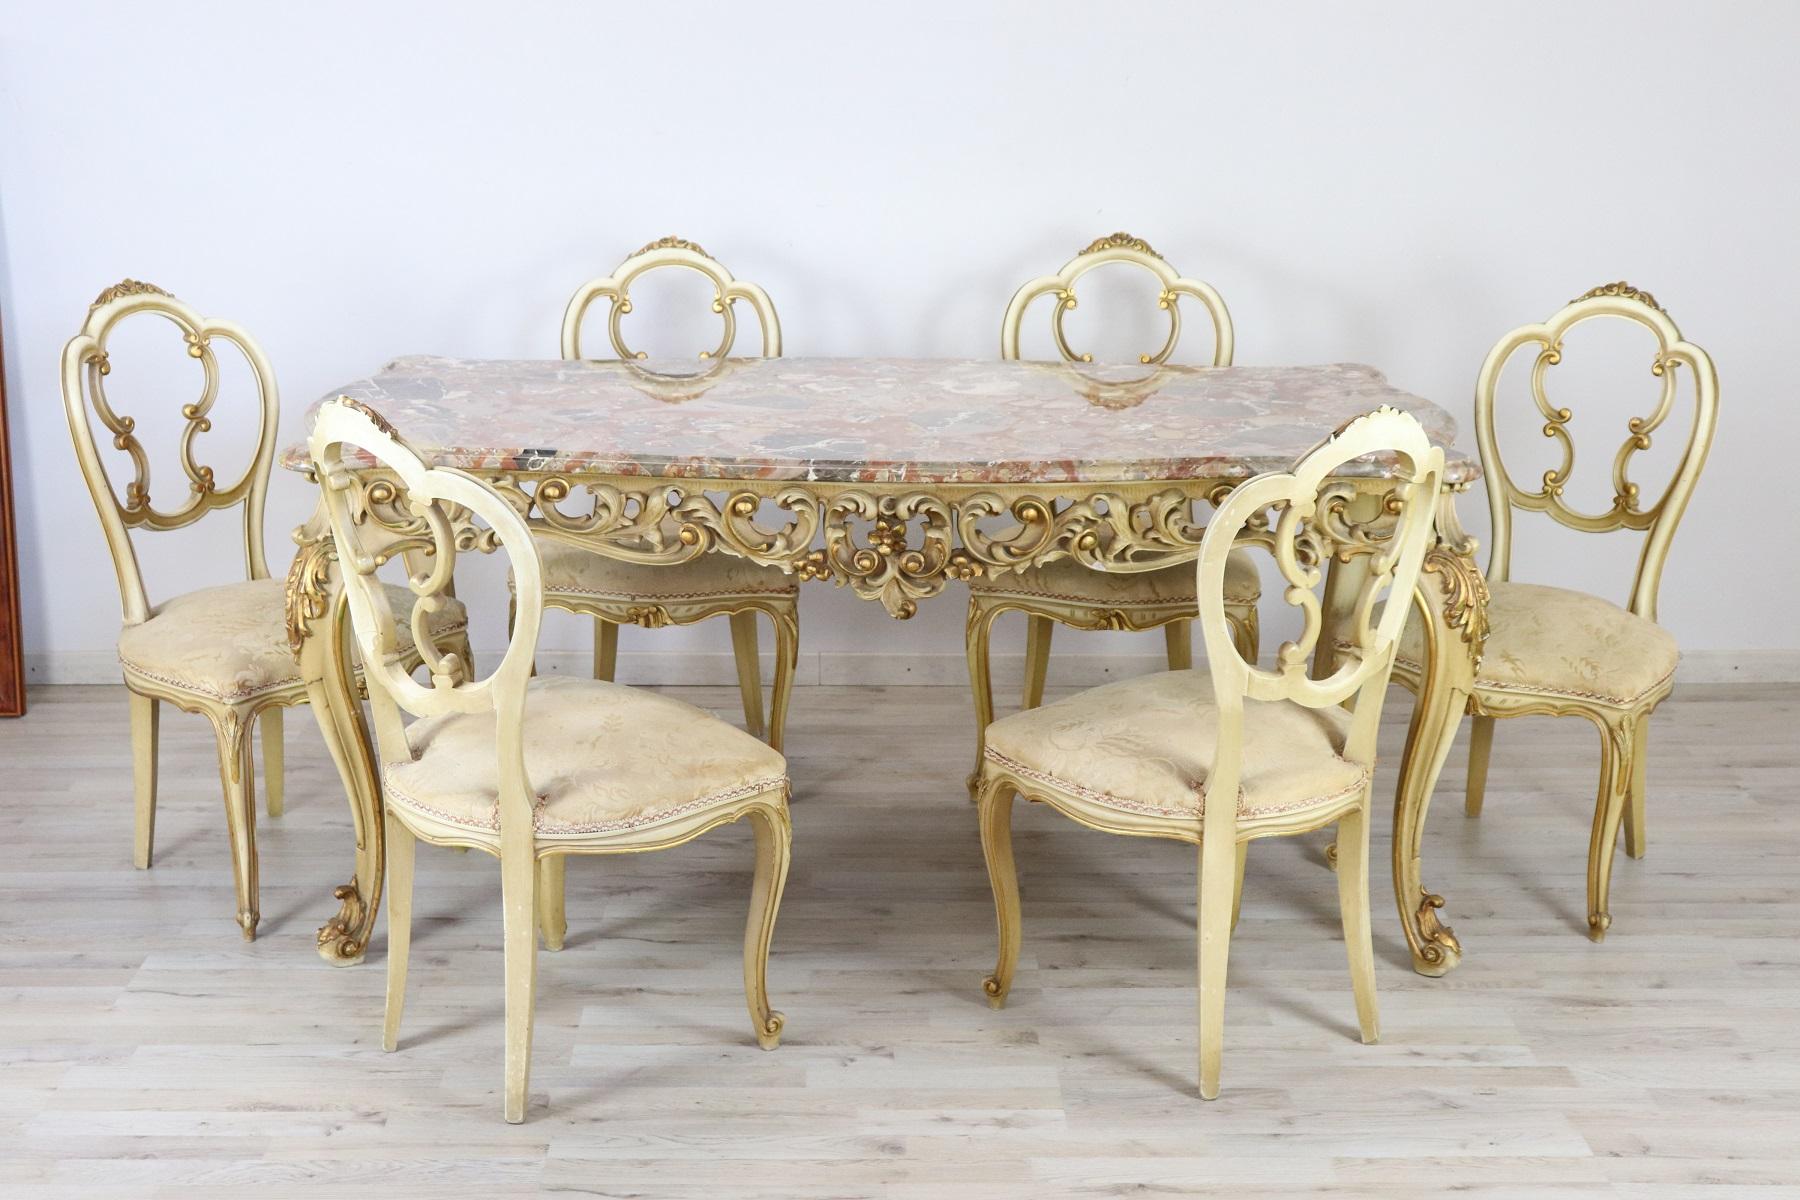 20th Century Italian Baroque Style Carved Lacquered Gilded Wood Six Chairs 10